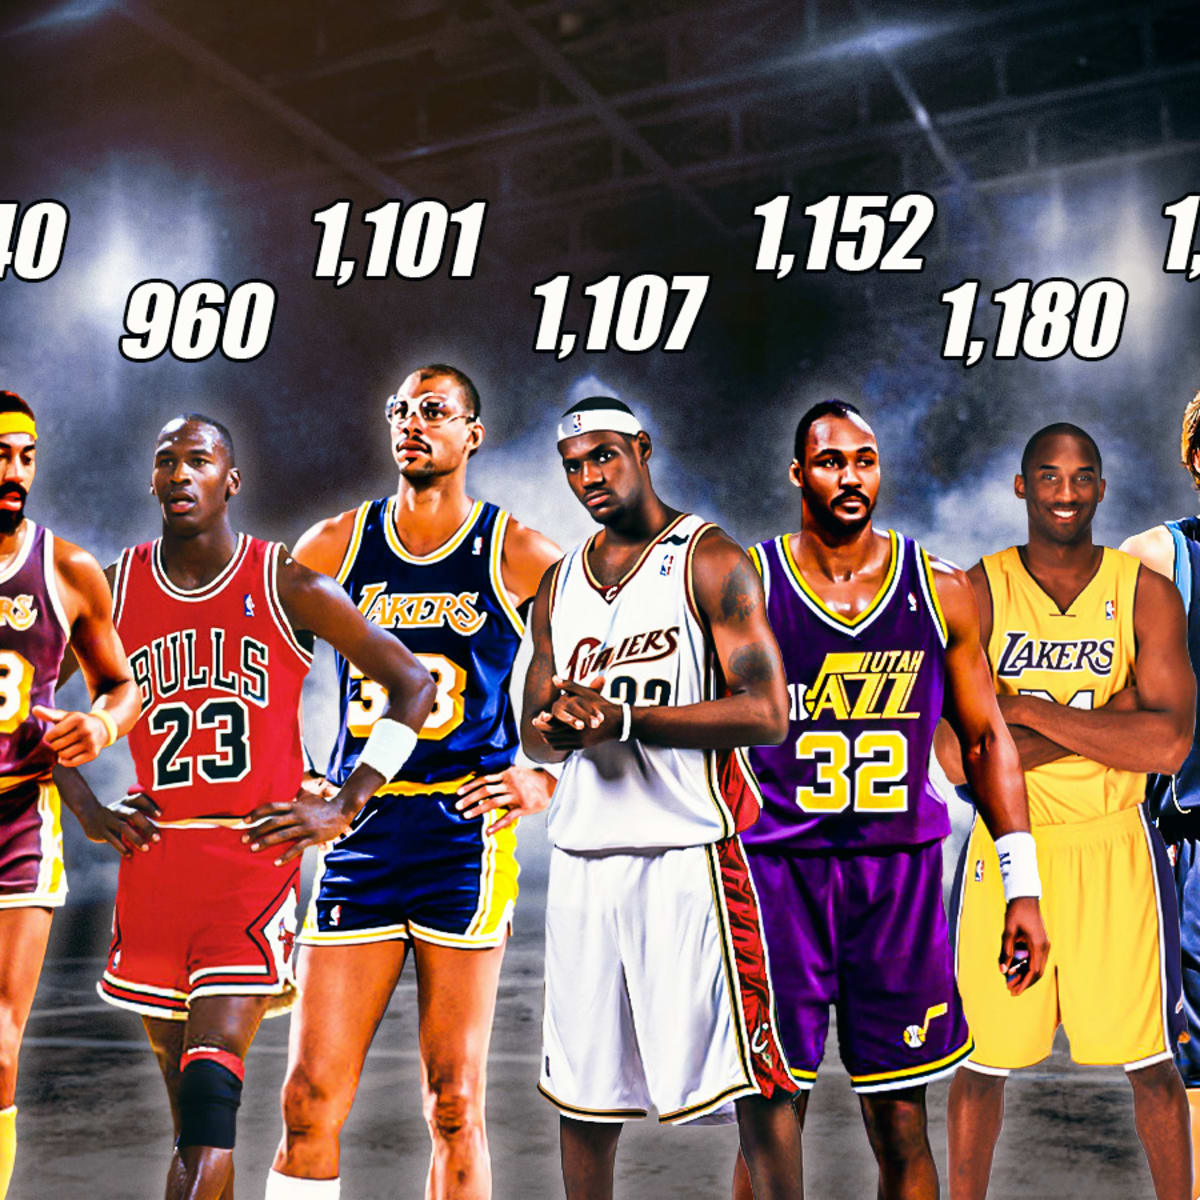 30 Top Black Basketball Players of All Time: From Wilt to LeBron